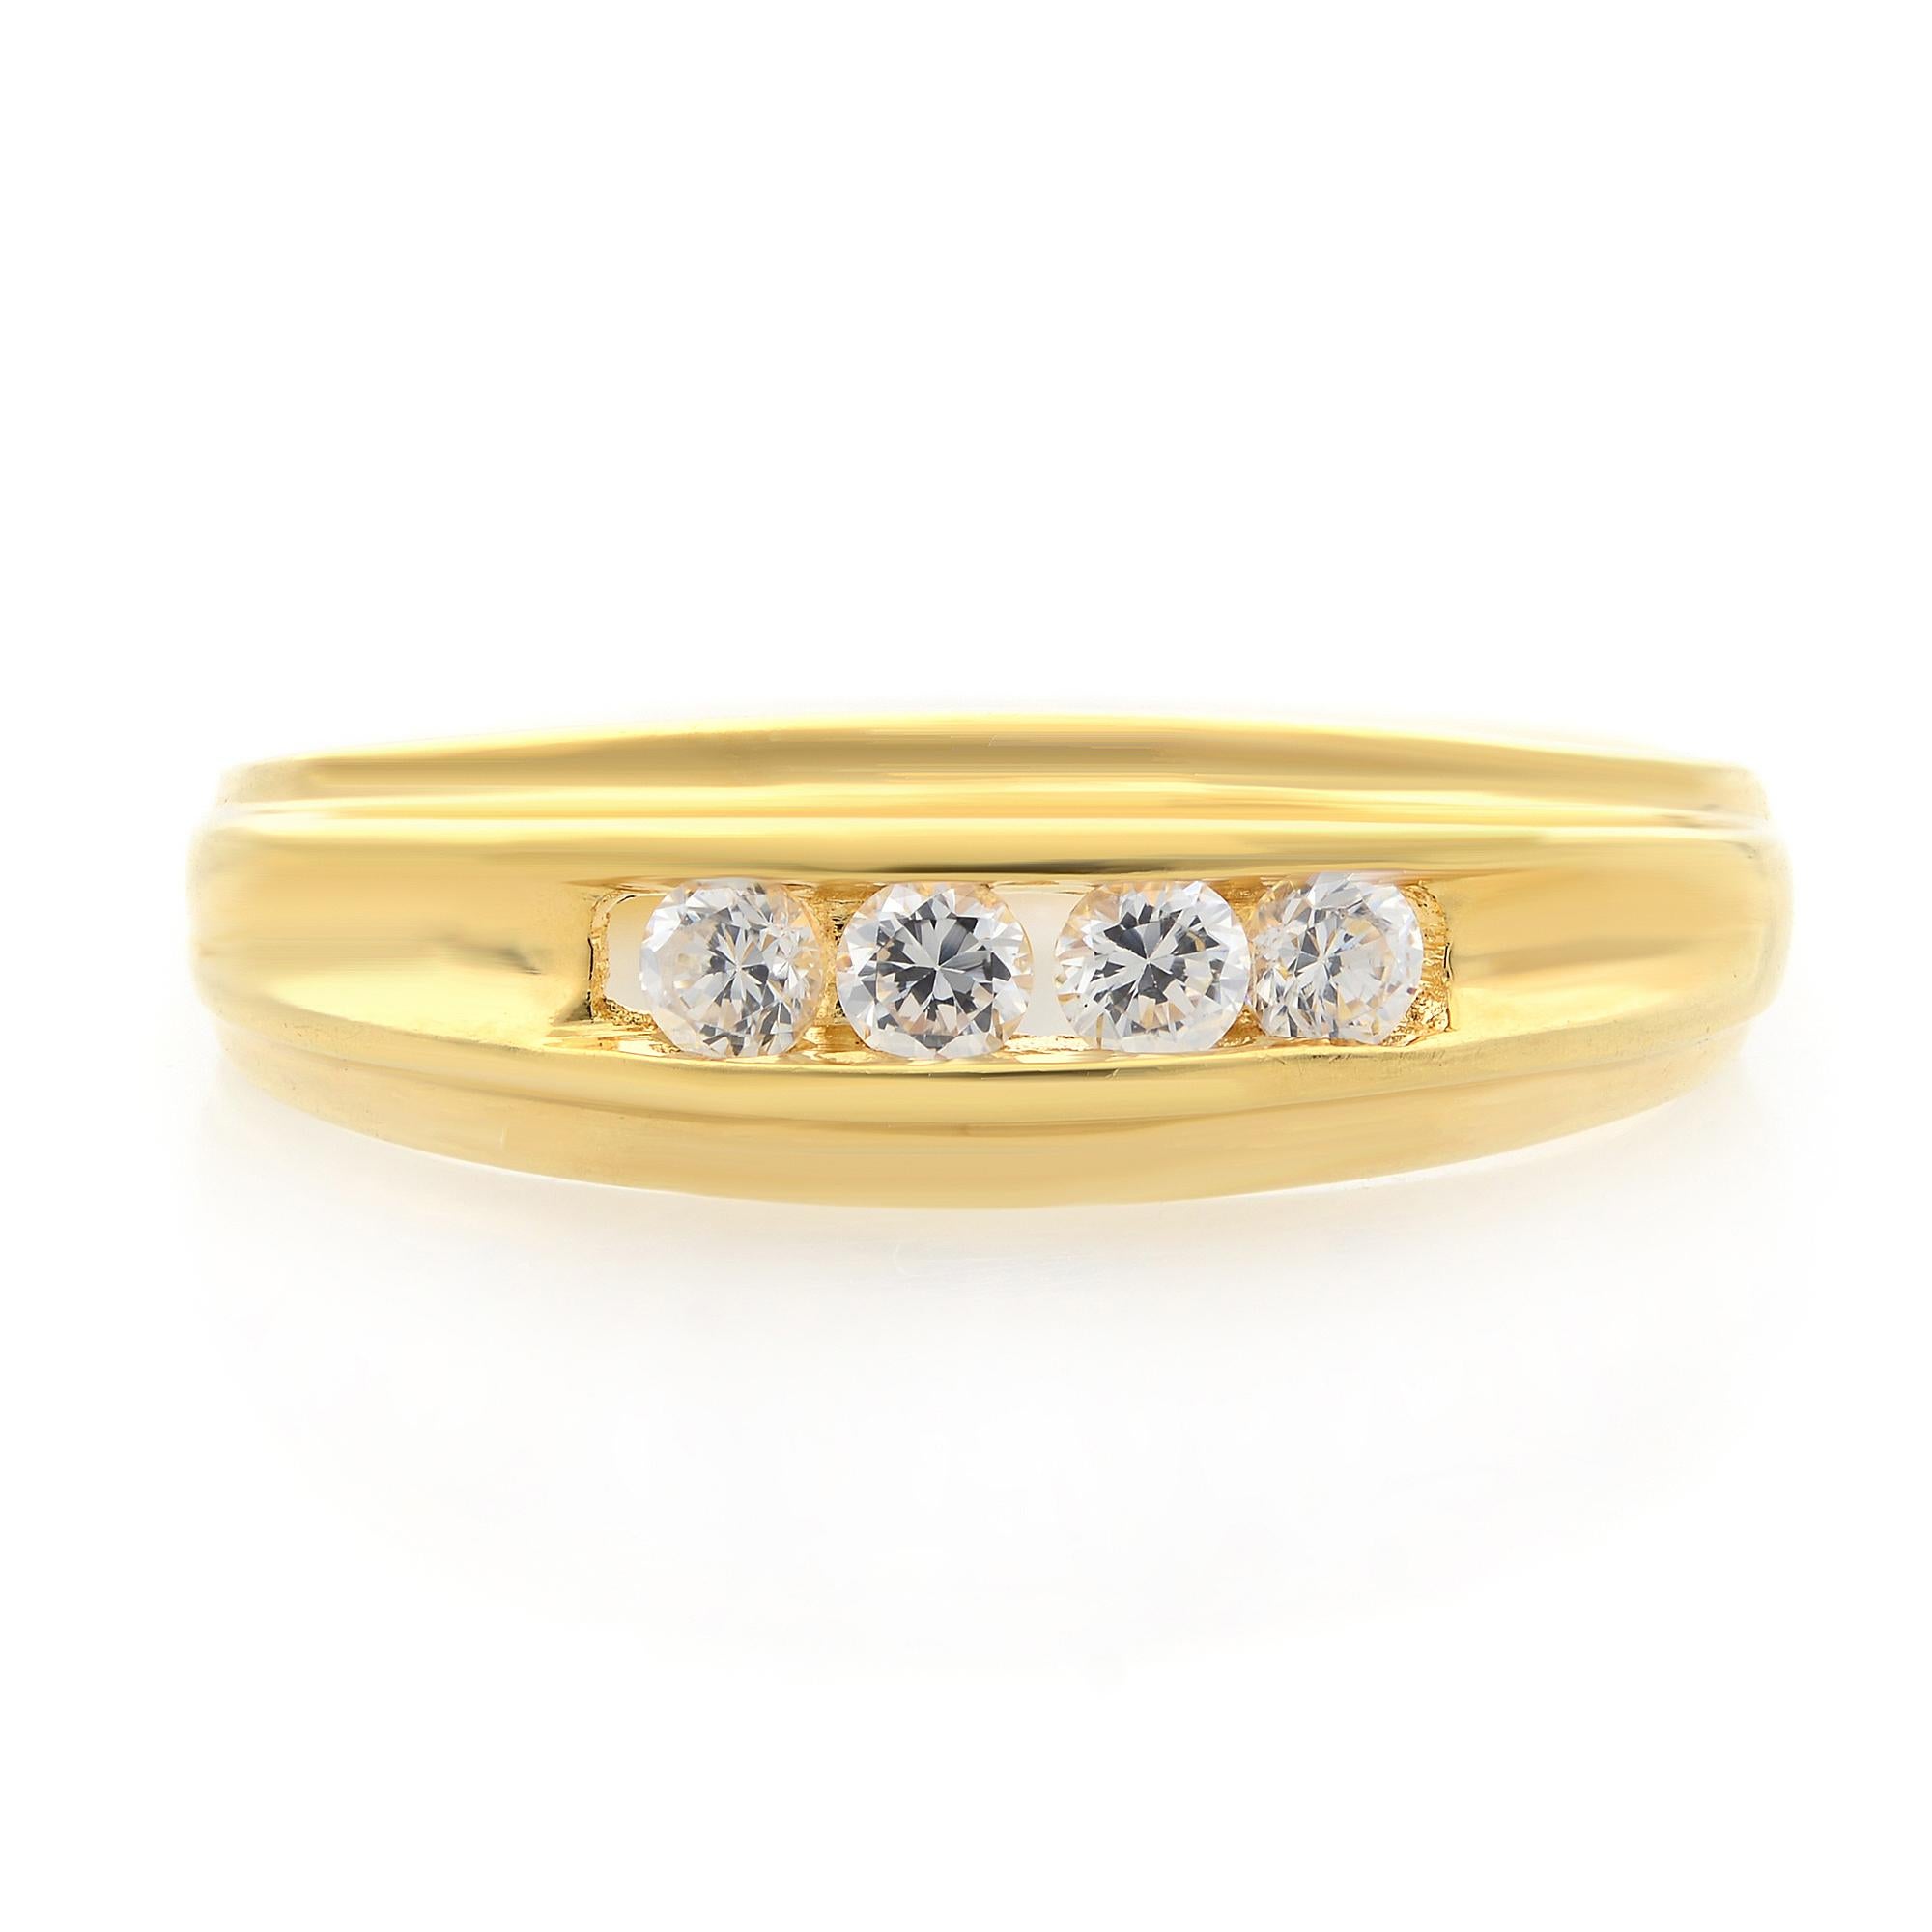 Classic and elegant diamond band ring rendered in highly polished 18k yellow gold. This ring features 4 perfectly matched sparkling round brilliant cut diamonds in channel setting totaling 0.25 carat. Diamond quality: G-H color and VS-SI clarity.